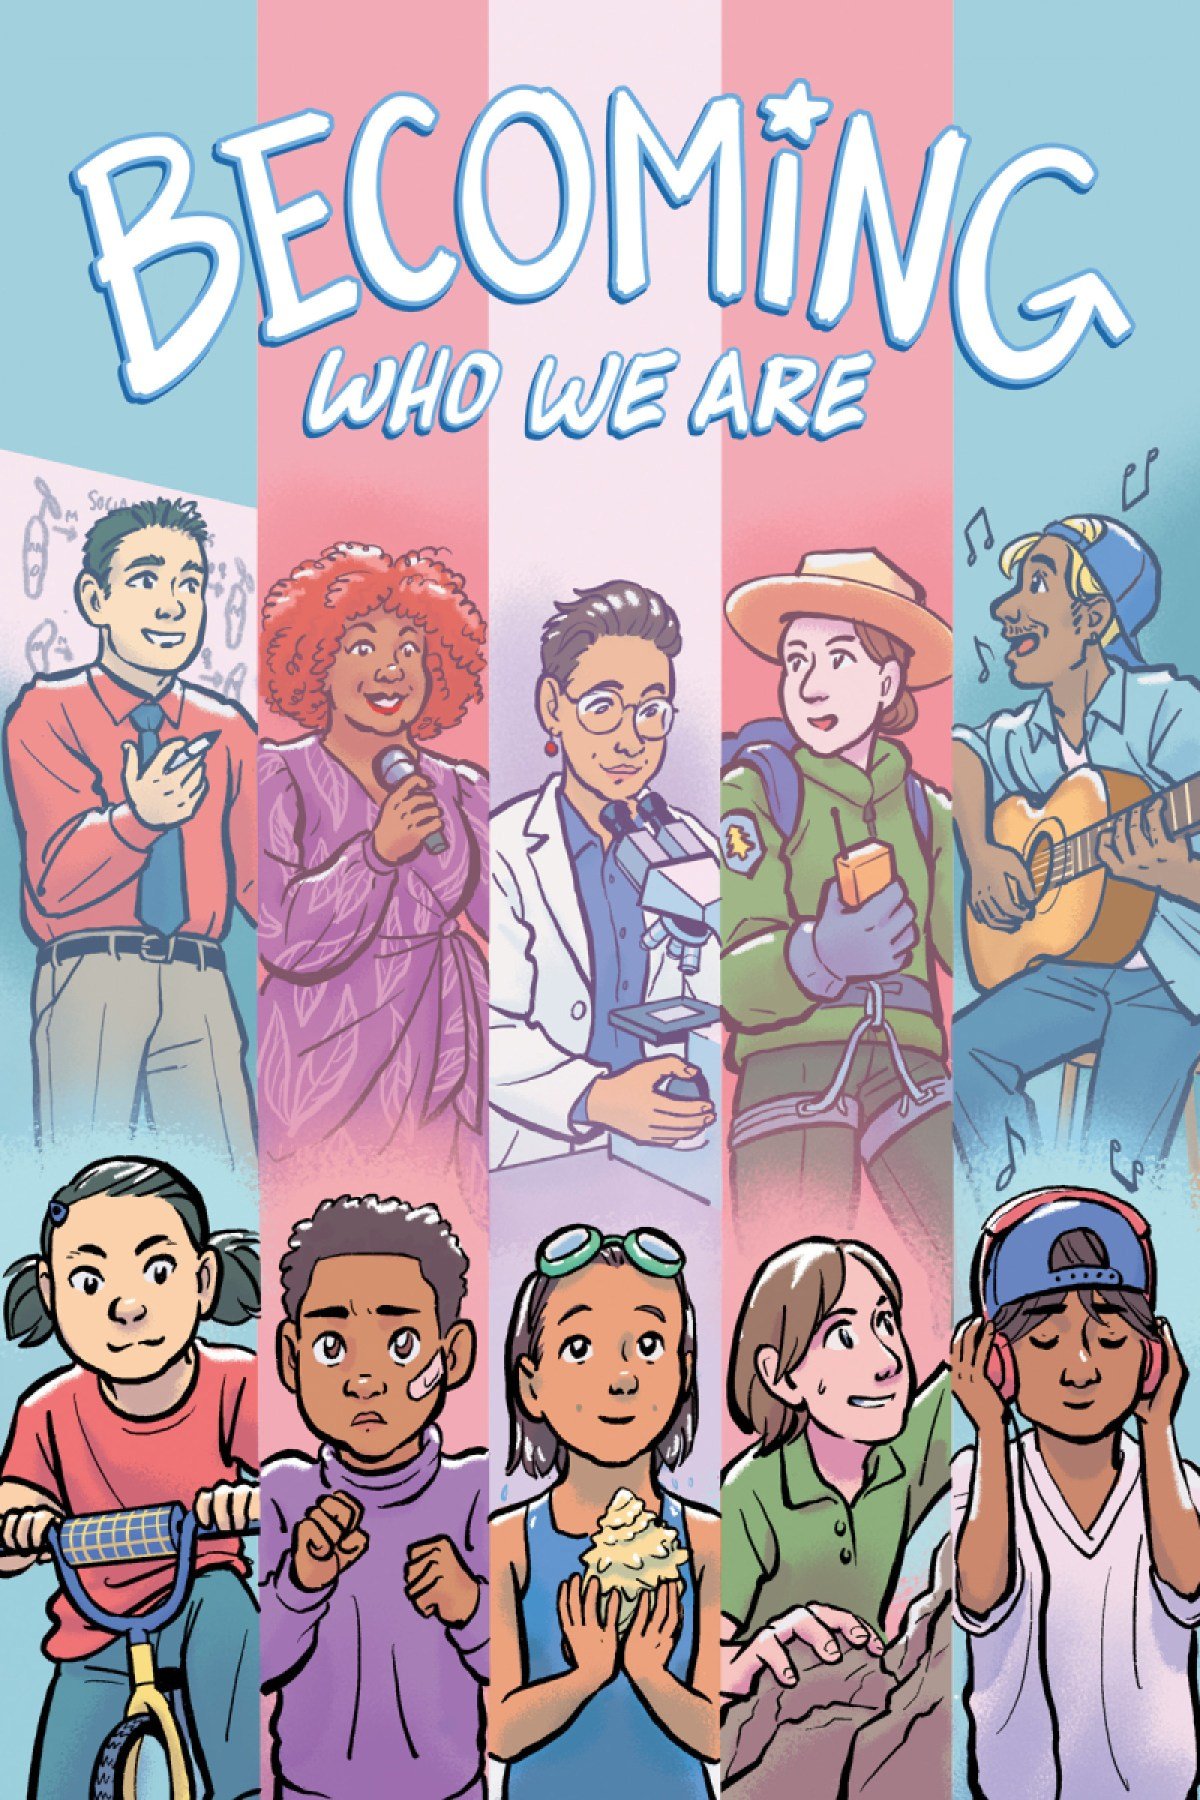 The cover art for Becoming Who We Are from A Wave Blue World, drawn by Hazel Newlevant. Behind the top title text, trans adults are drawn in the center with themselves as kids in focus at the bottom. The trans pride flag colors are framing each character for 5 characters total.